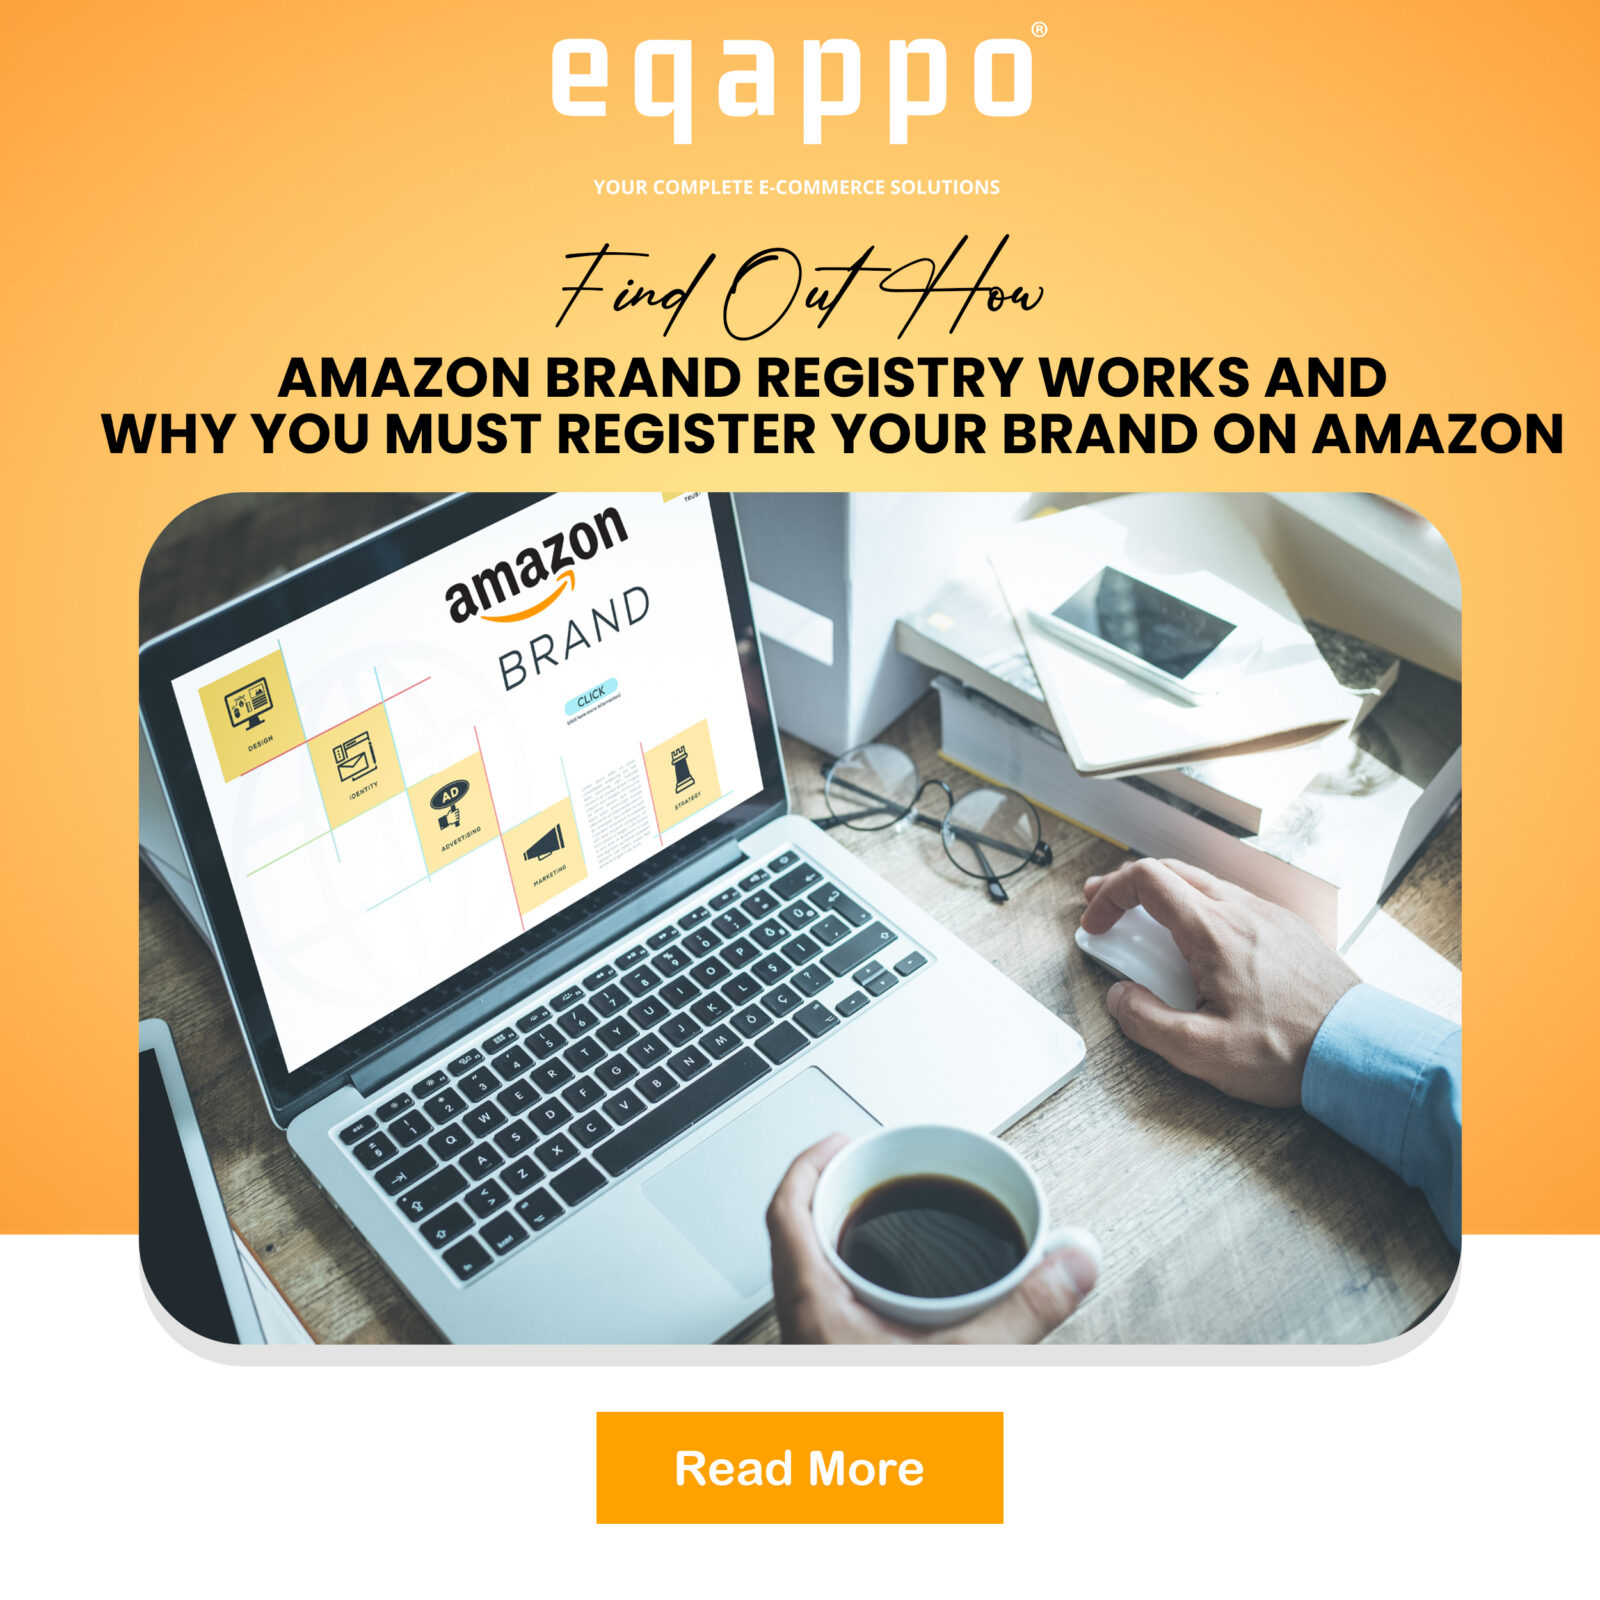 FIND OUT HOW AMAZON BRAND REGISTRY WORKS AND WHY YOU MUST REGISTER YOUR BRAND ON AMAZON